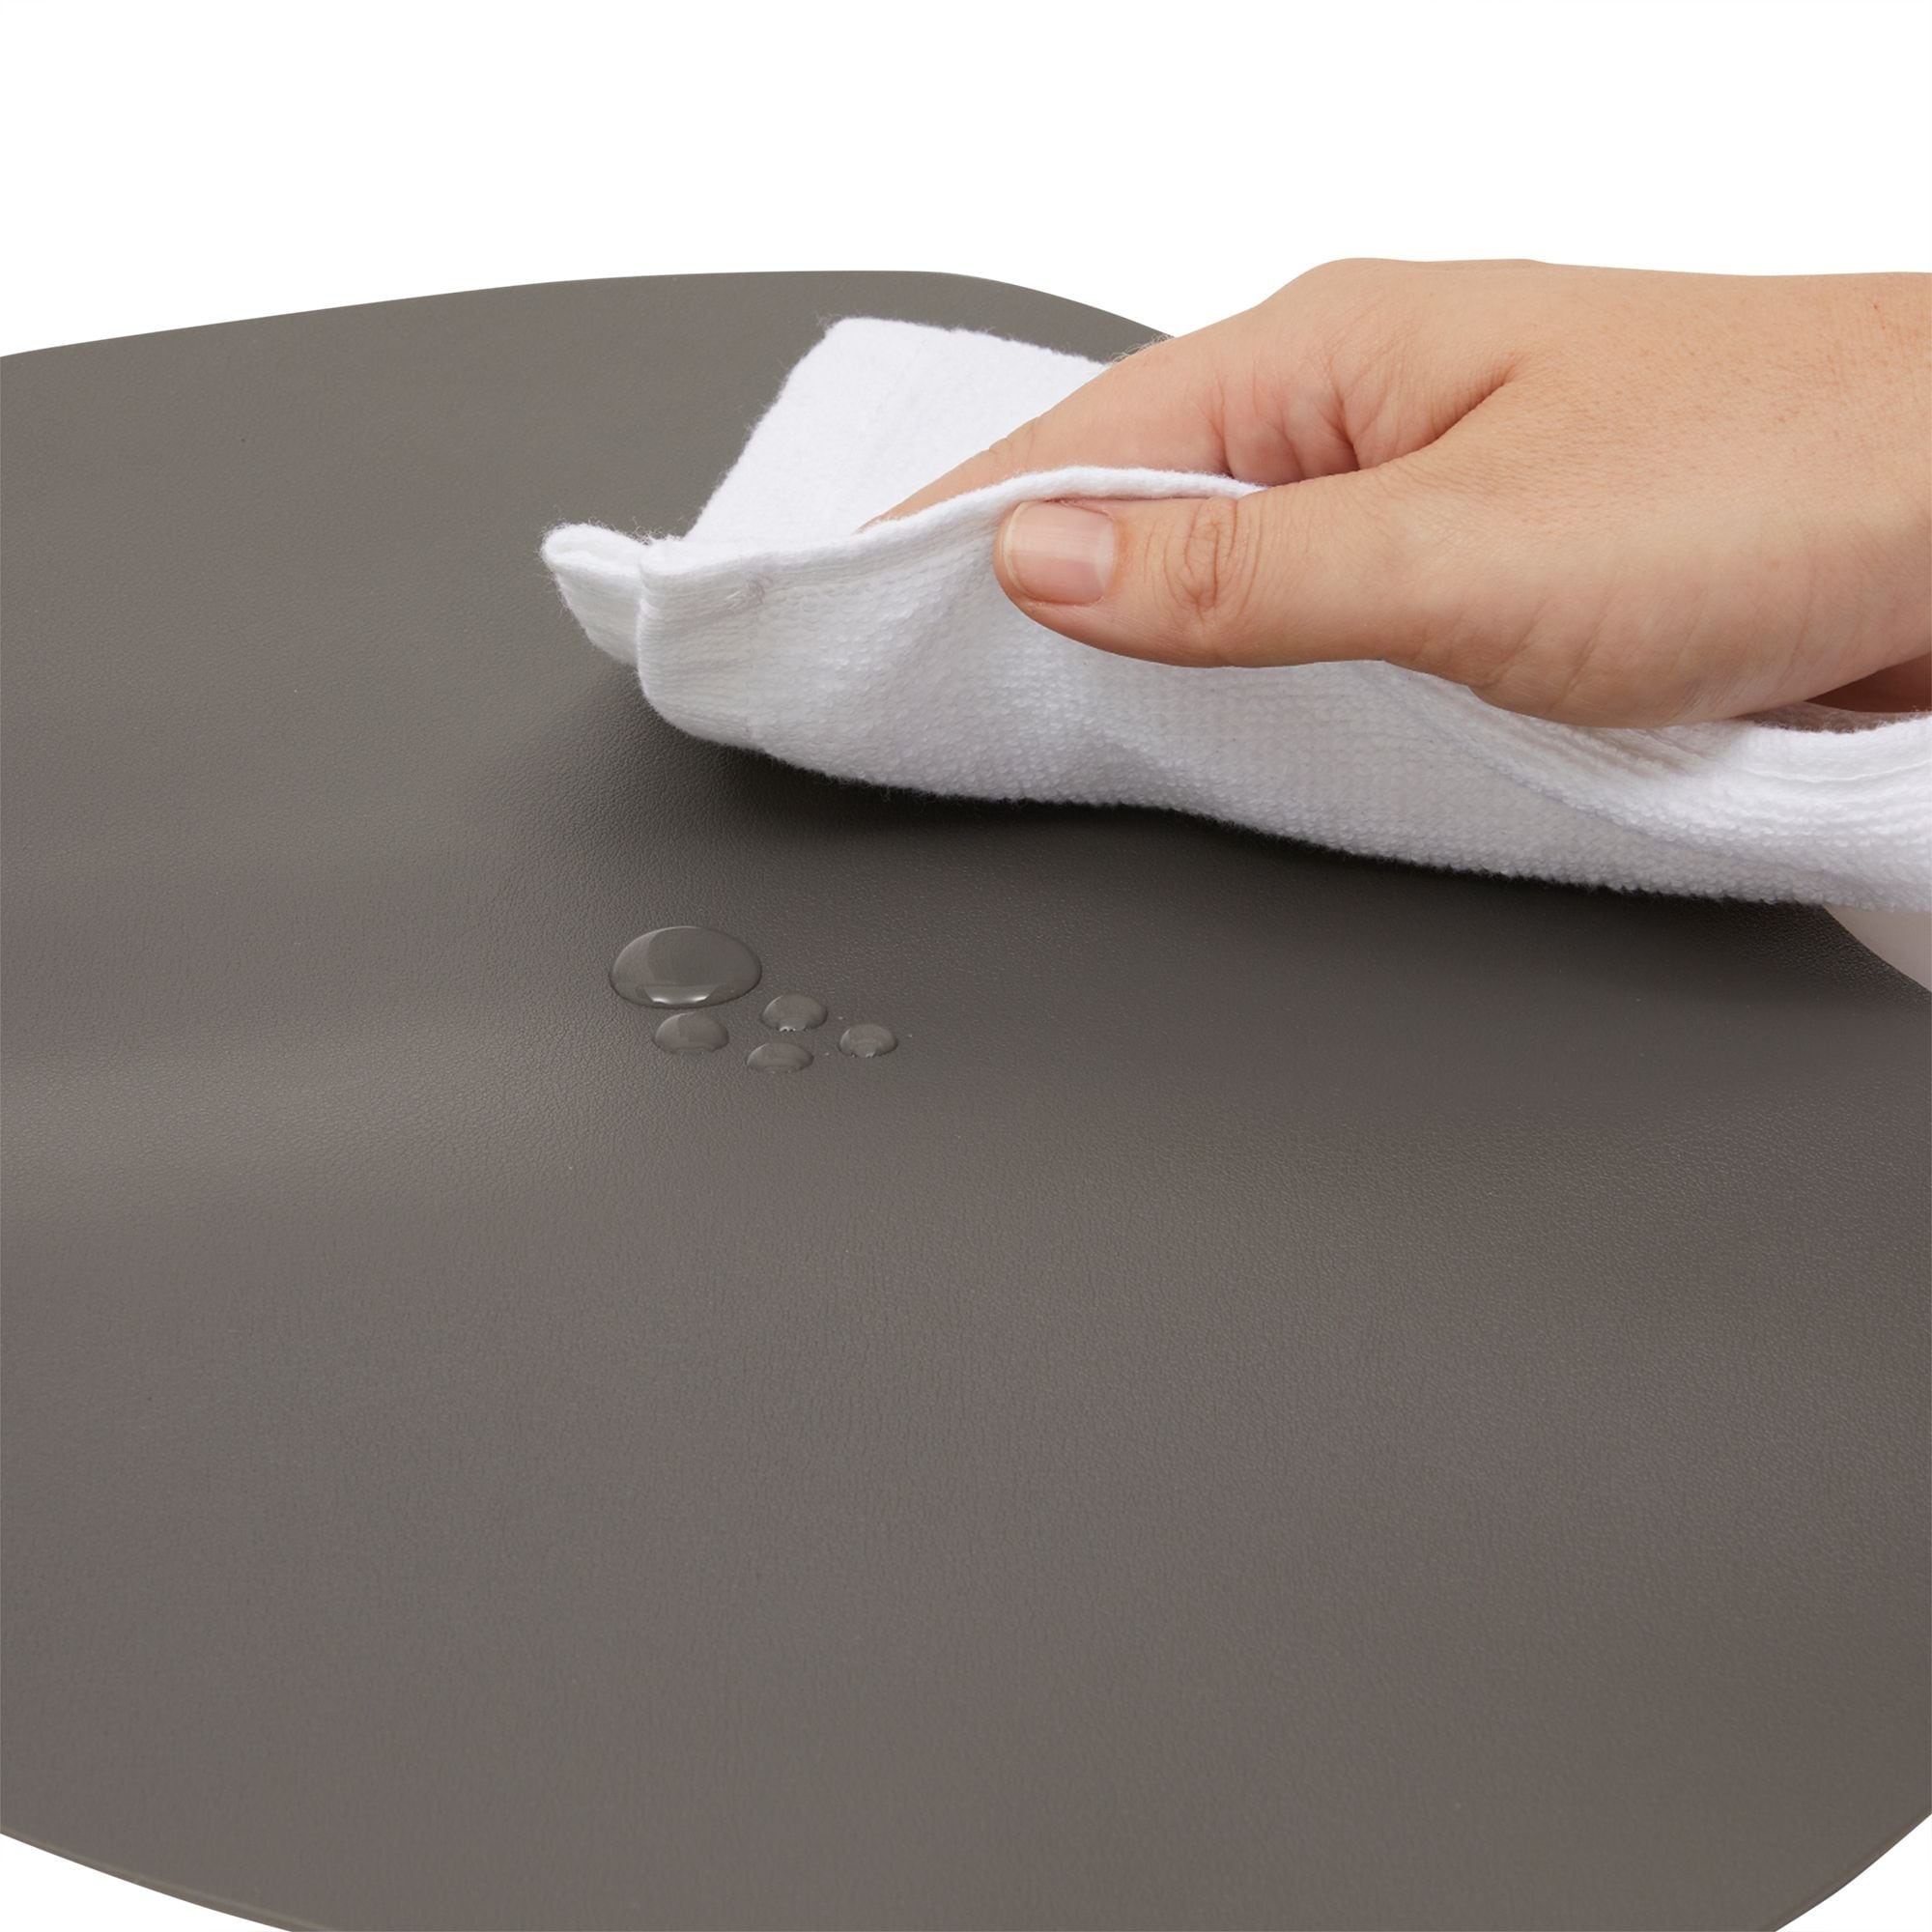 Tabeto Leather Set of 4 Placemats,Wipeable Washable Place